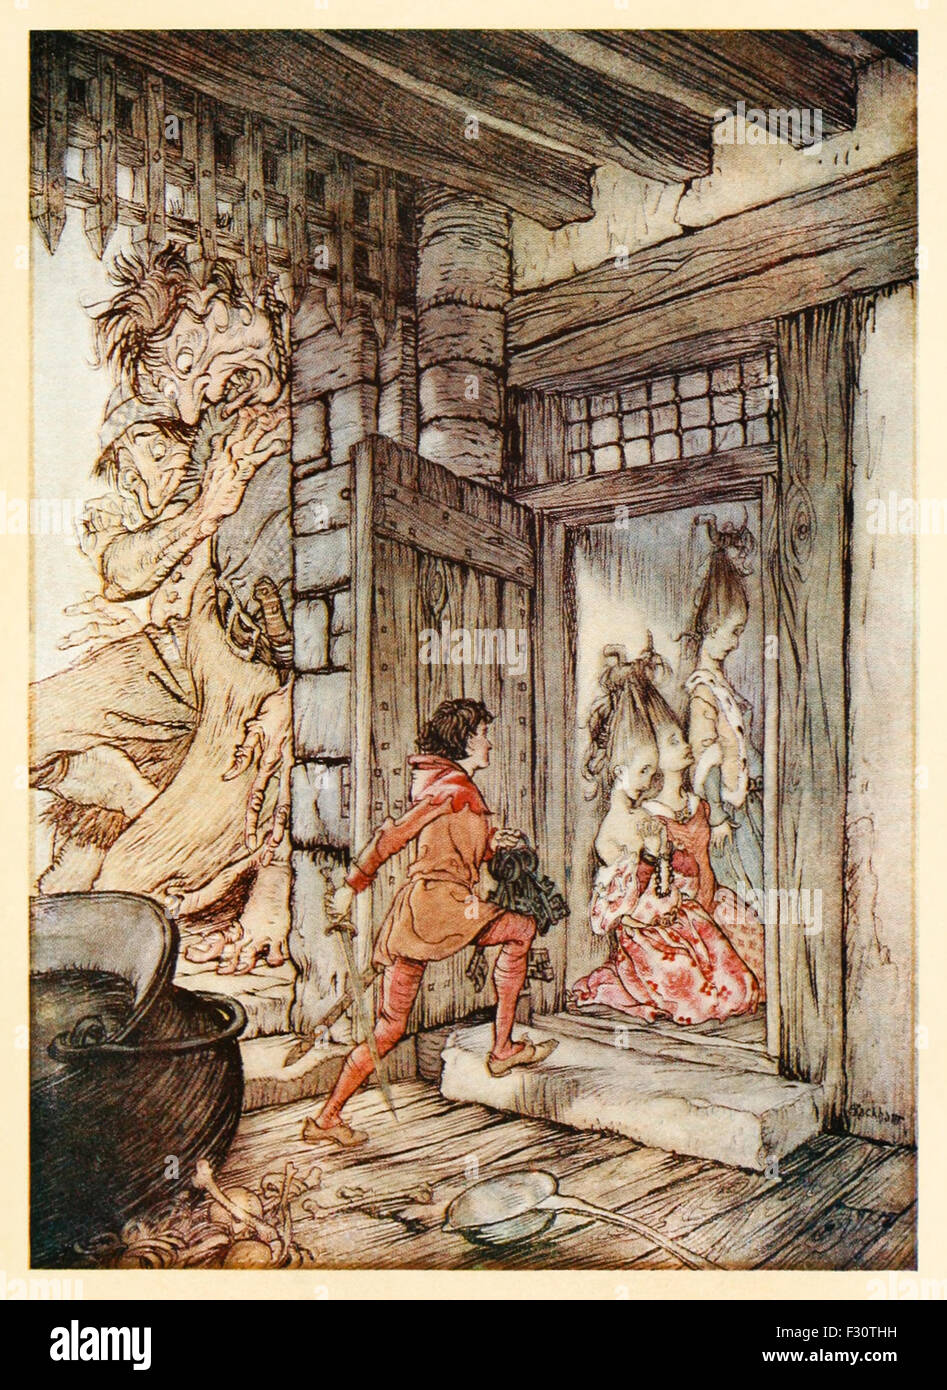 'Taking the keys of the castle, Jack unlocked all the doors ' from 'Jack the Giant Killer' in 'English Fairy Tales', illustration by Arthur Rackham (1867-1939). See description for more information. Stock Photo